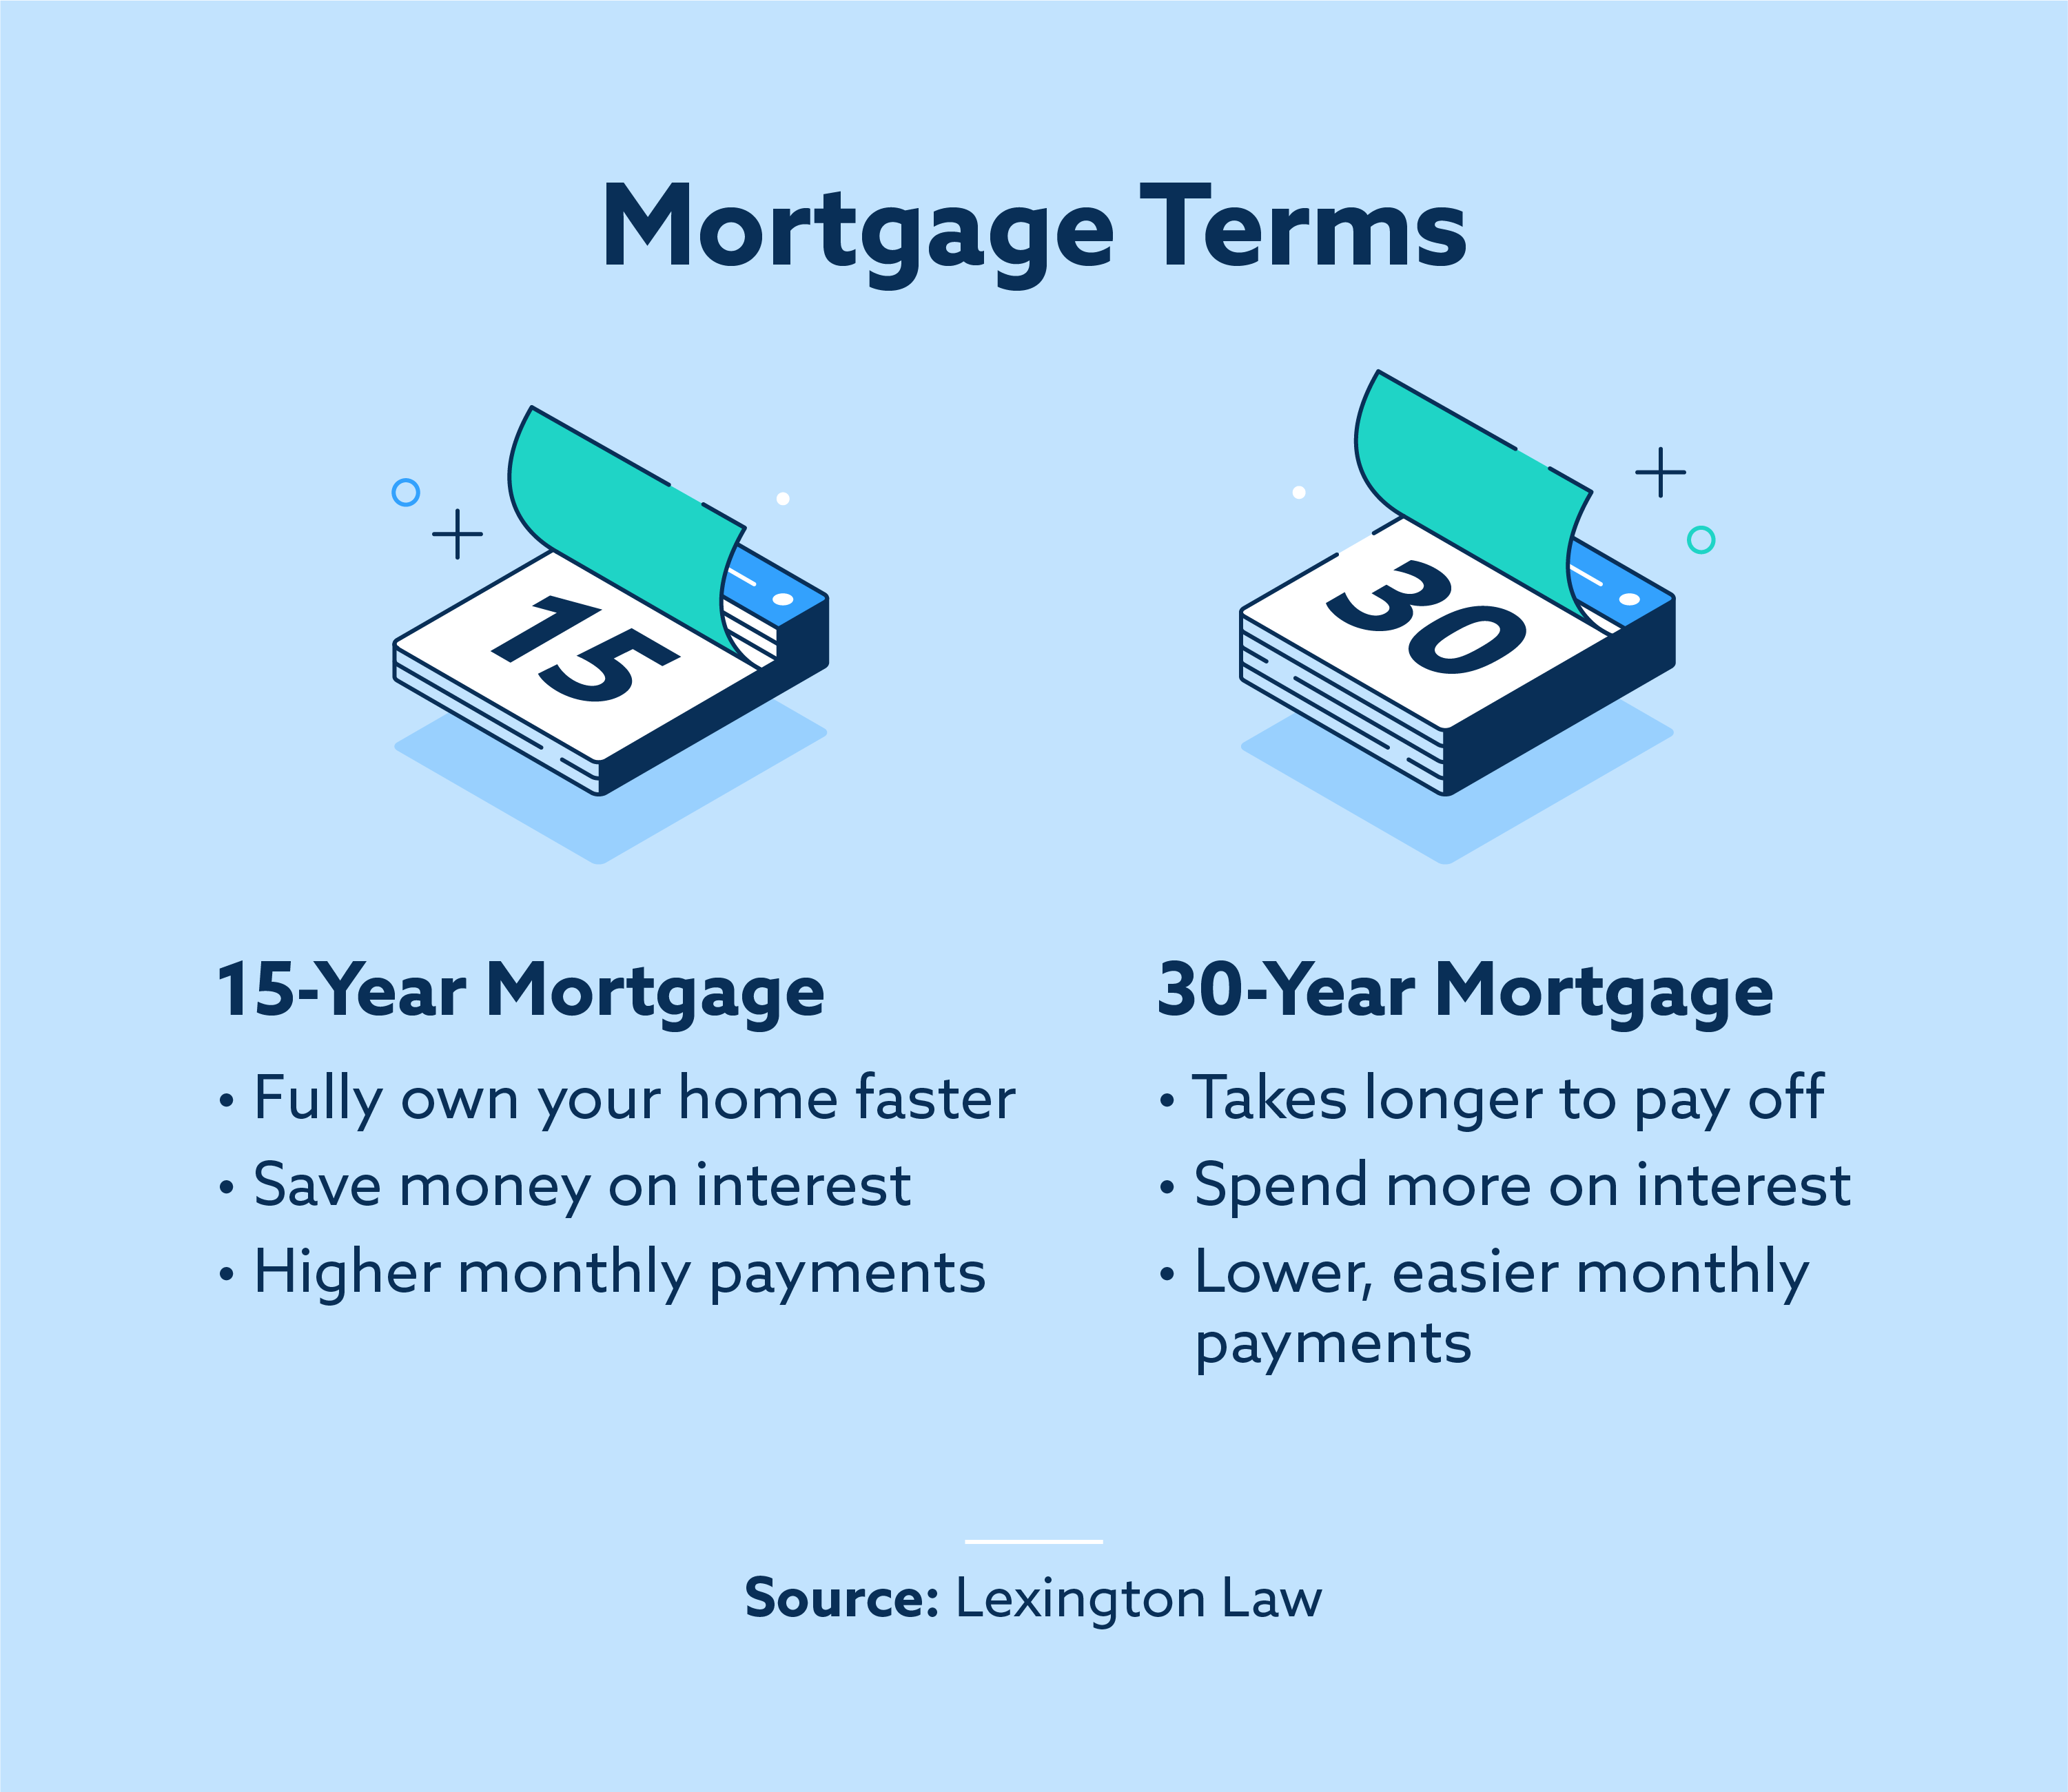 Mortgage terms